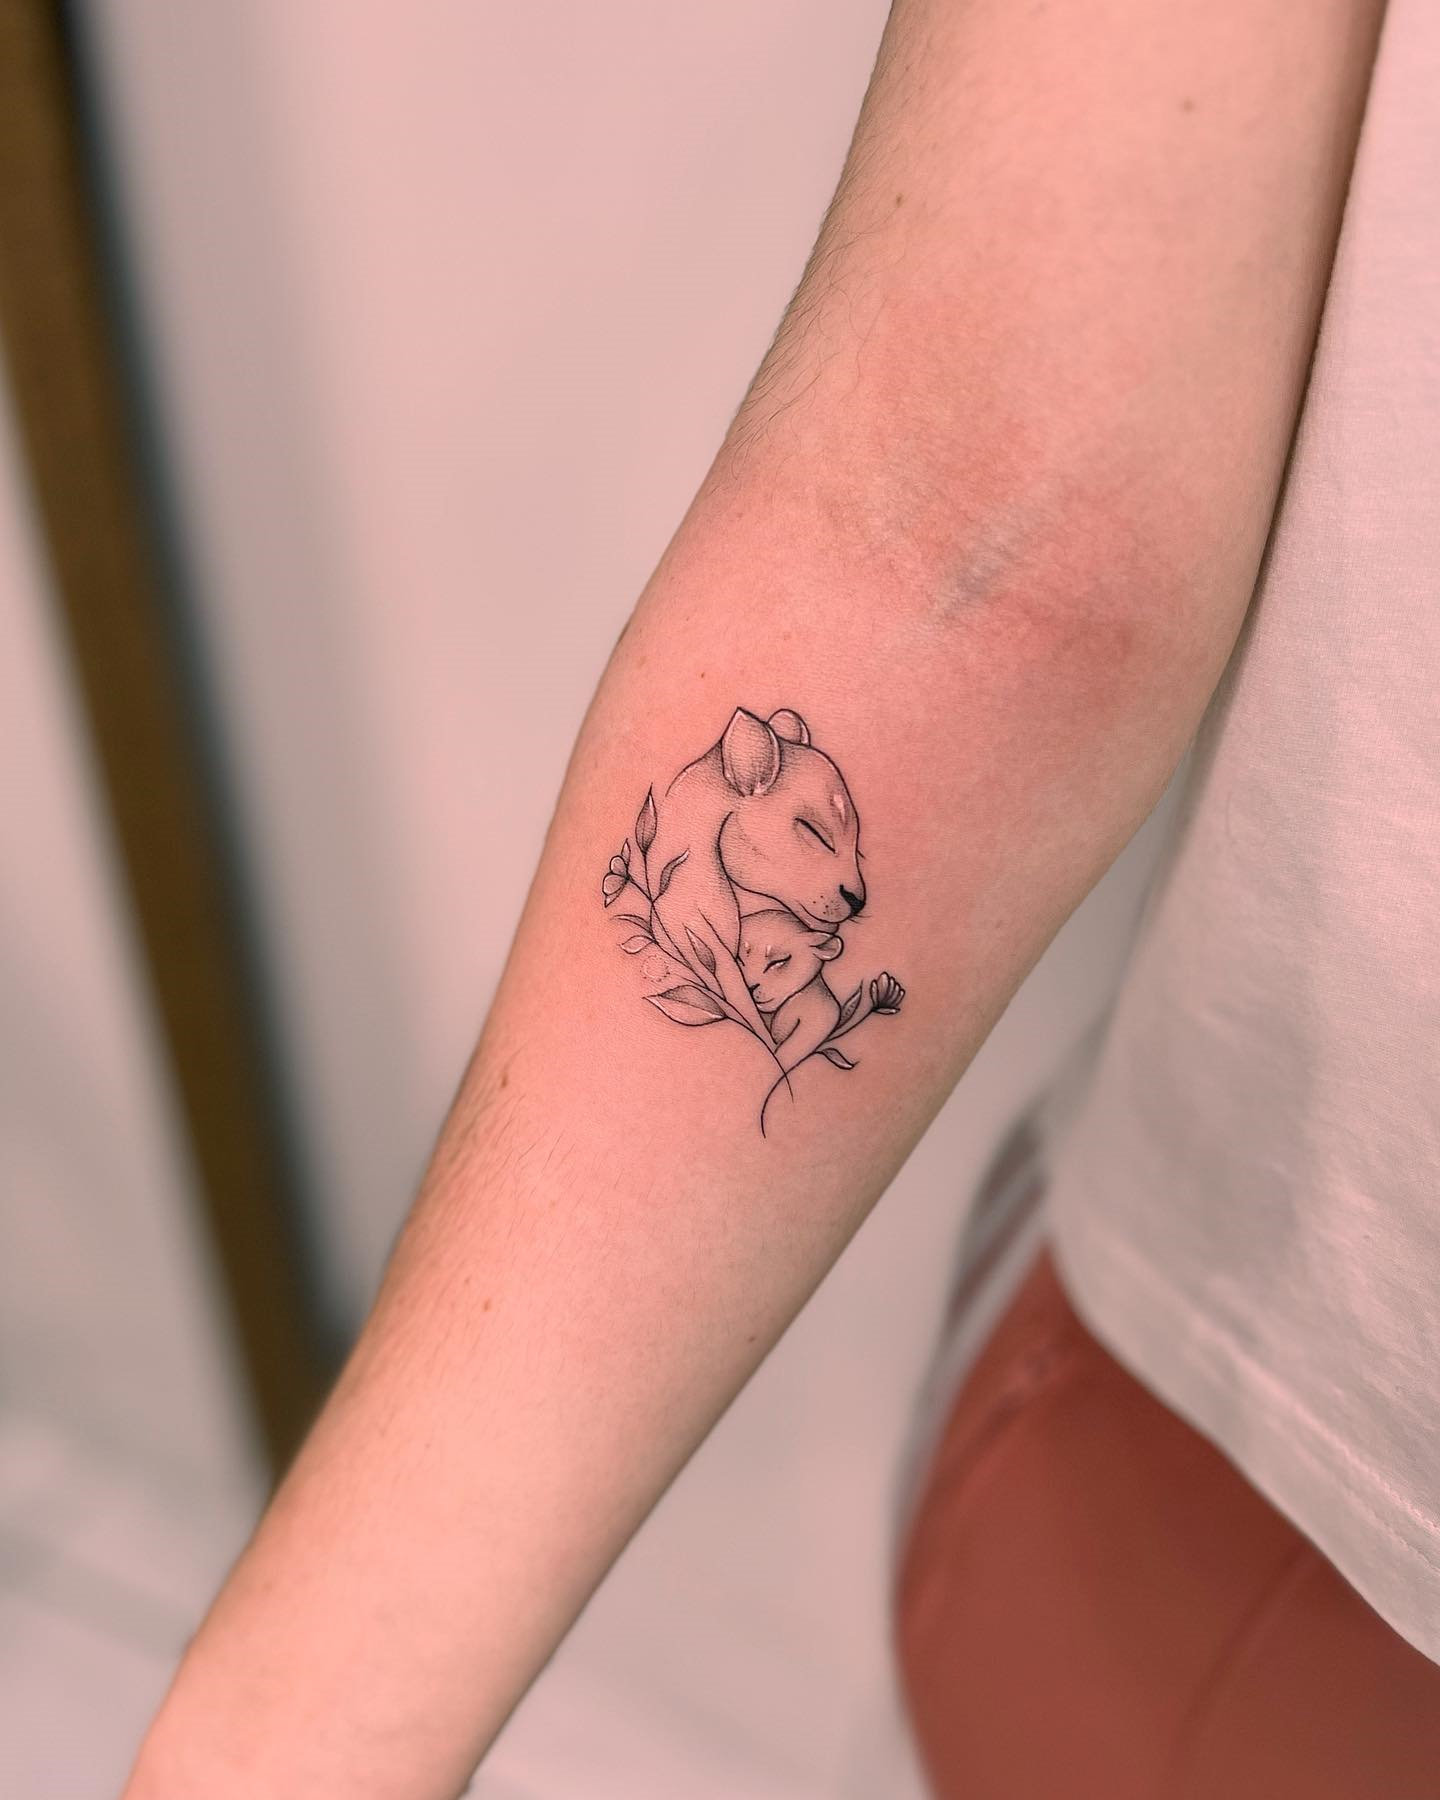 simple and small tattoos